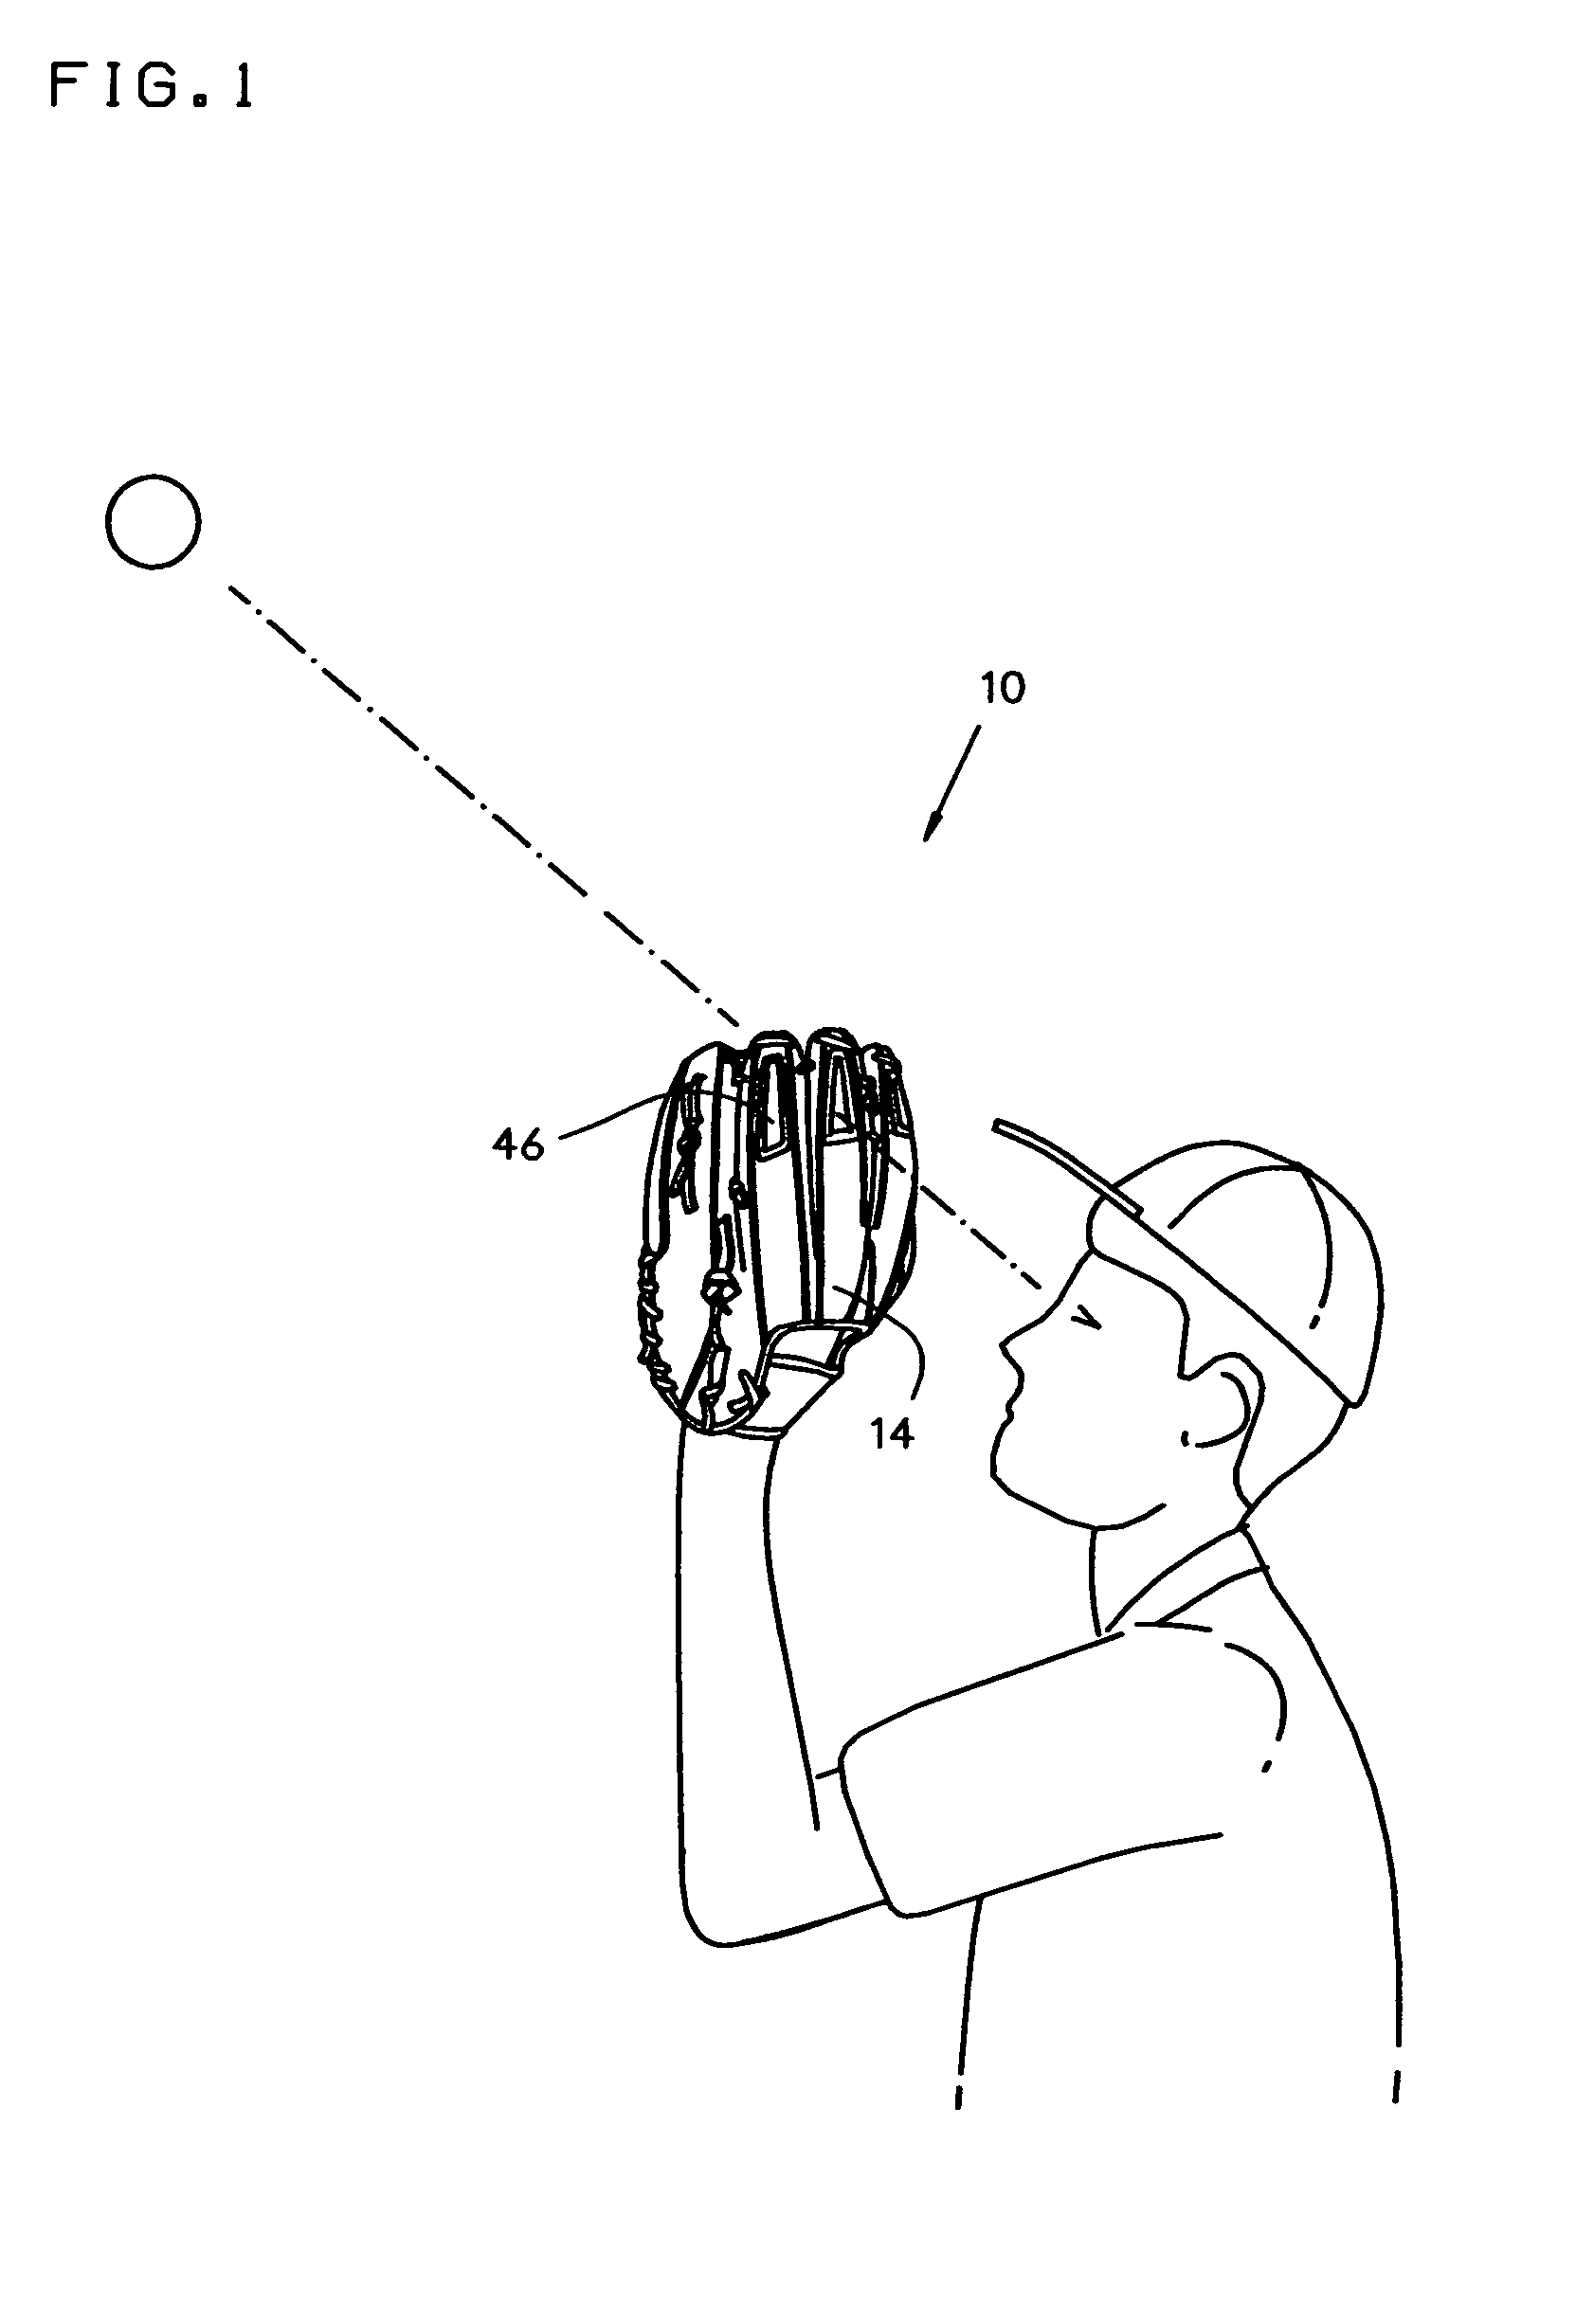 Ball glove having openings and improved weight balance